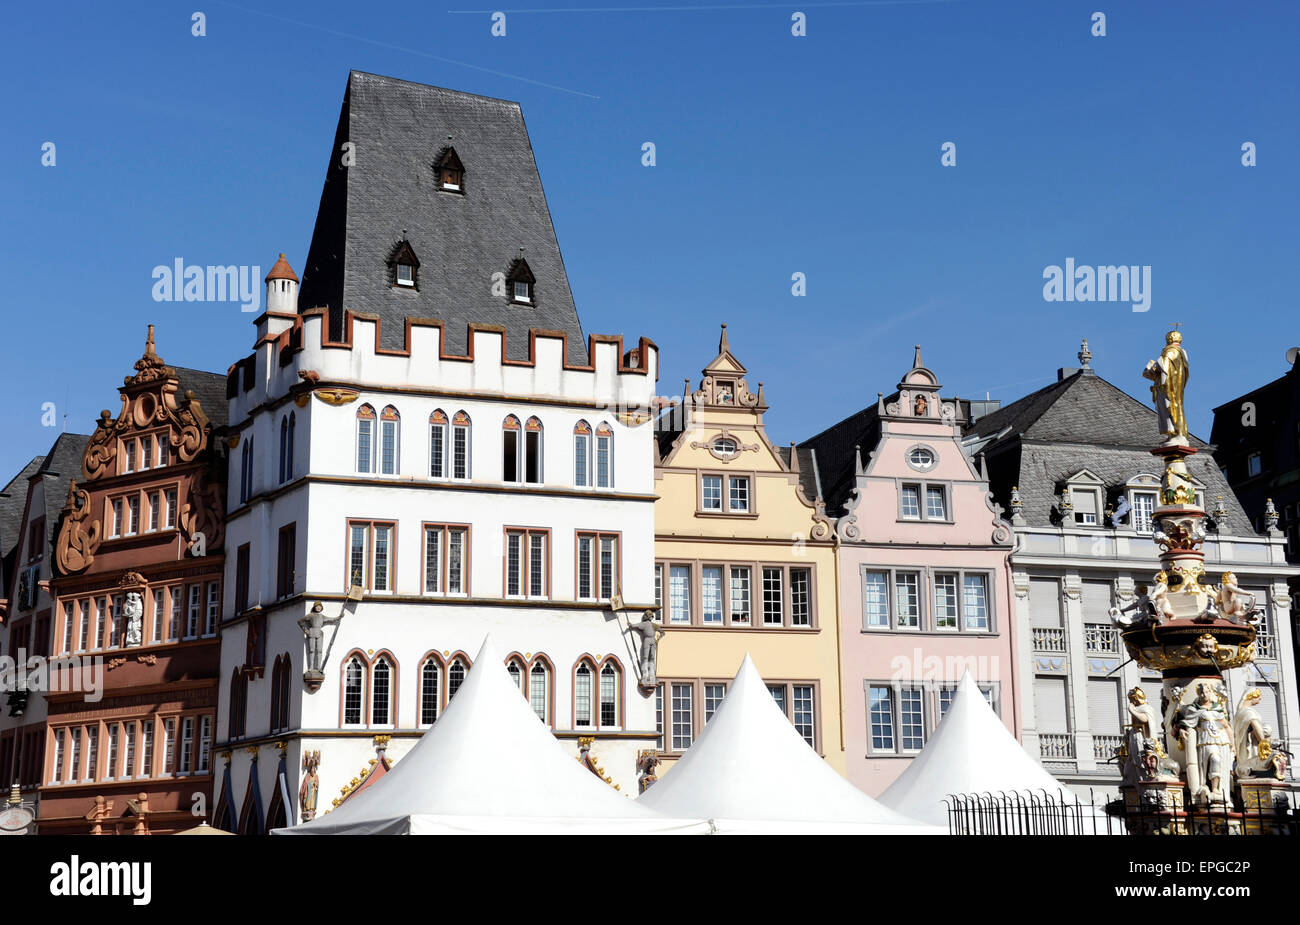 Trier,Treves,Steipe house and Petrus fountain,Hauptmark,old town,pedestrian zone,Rhineland-Palatinate,Germany Stock Photo